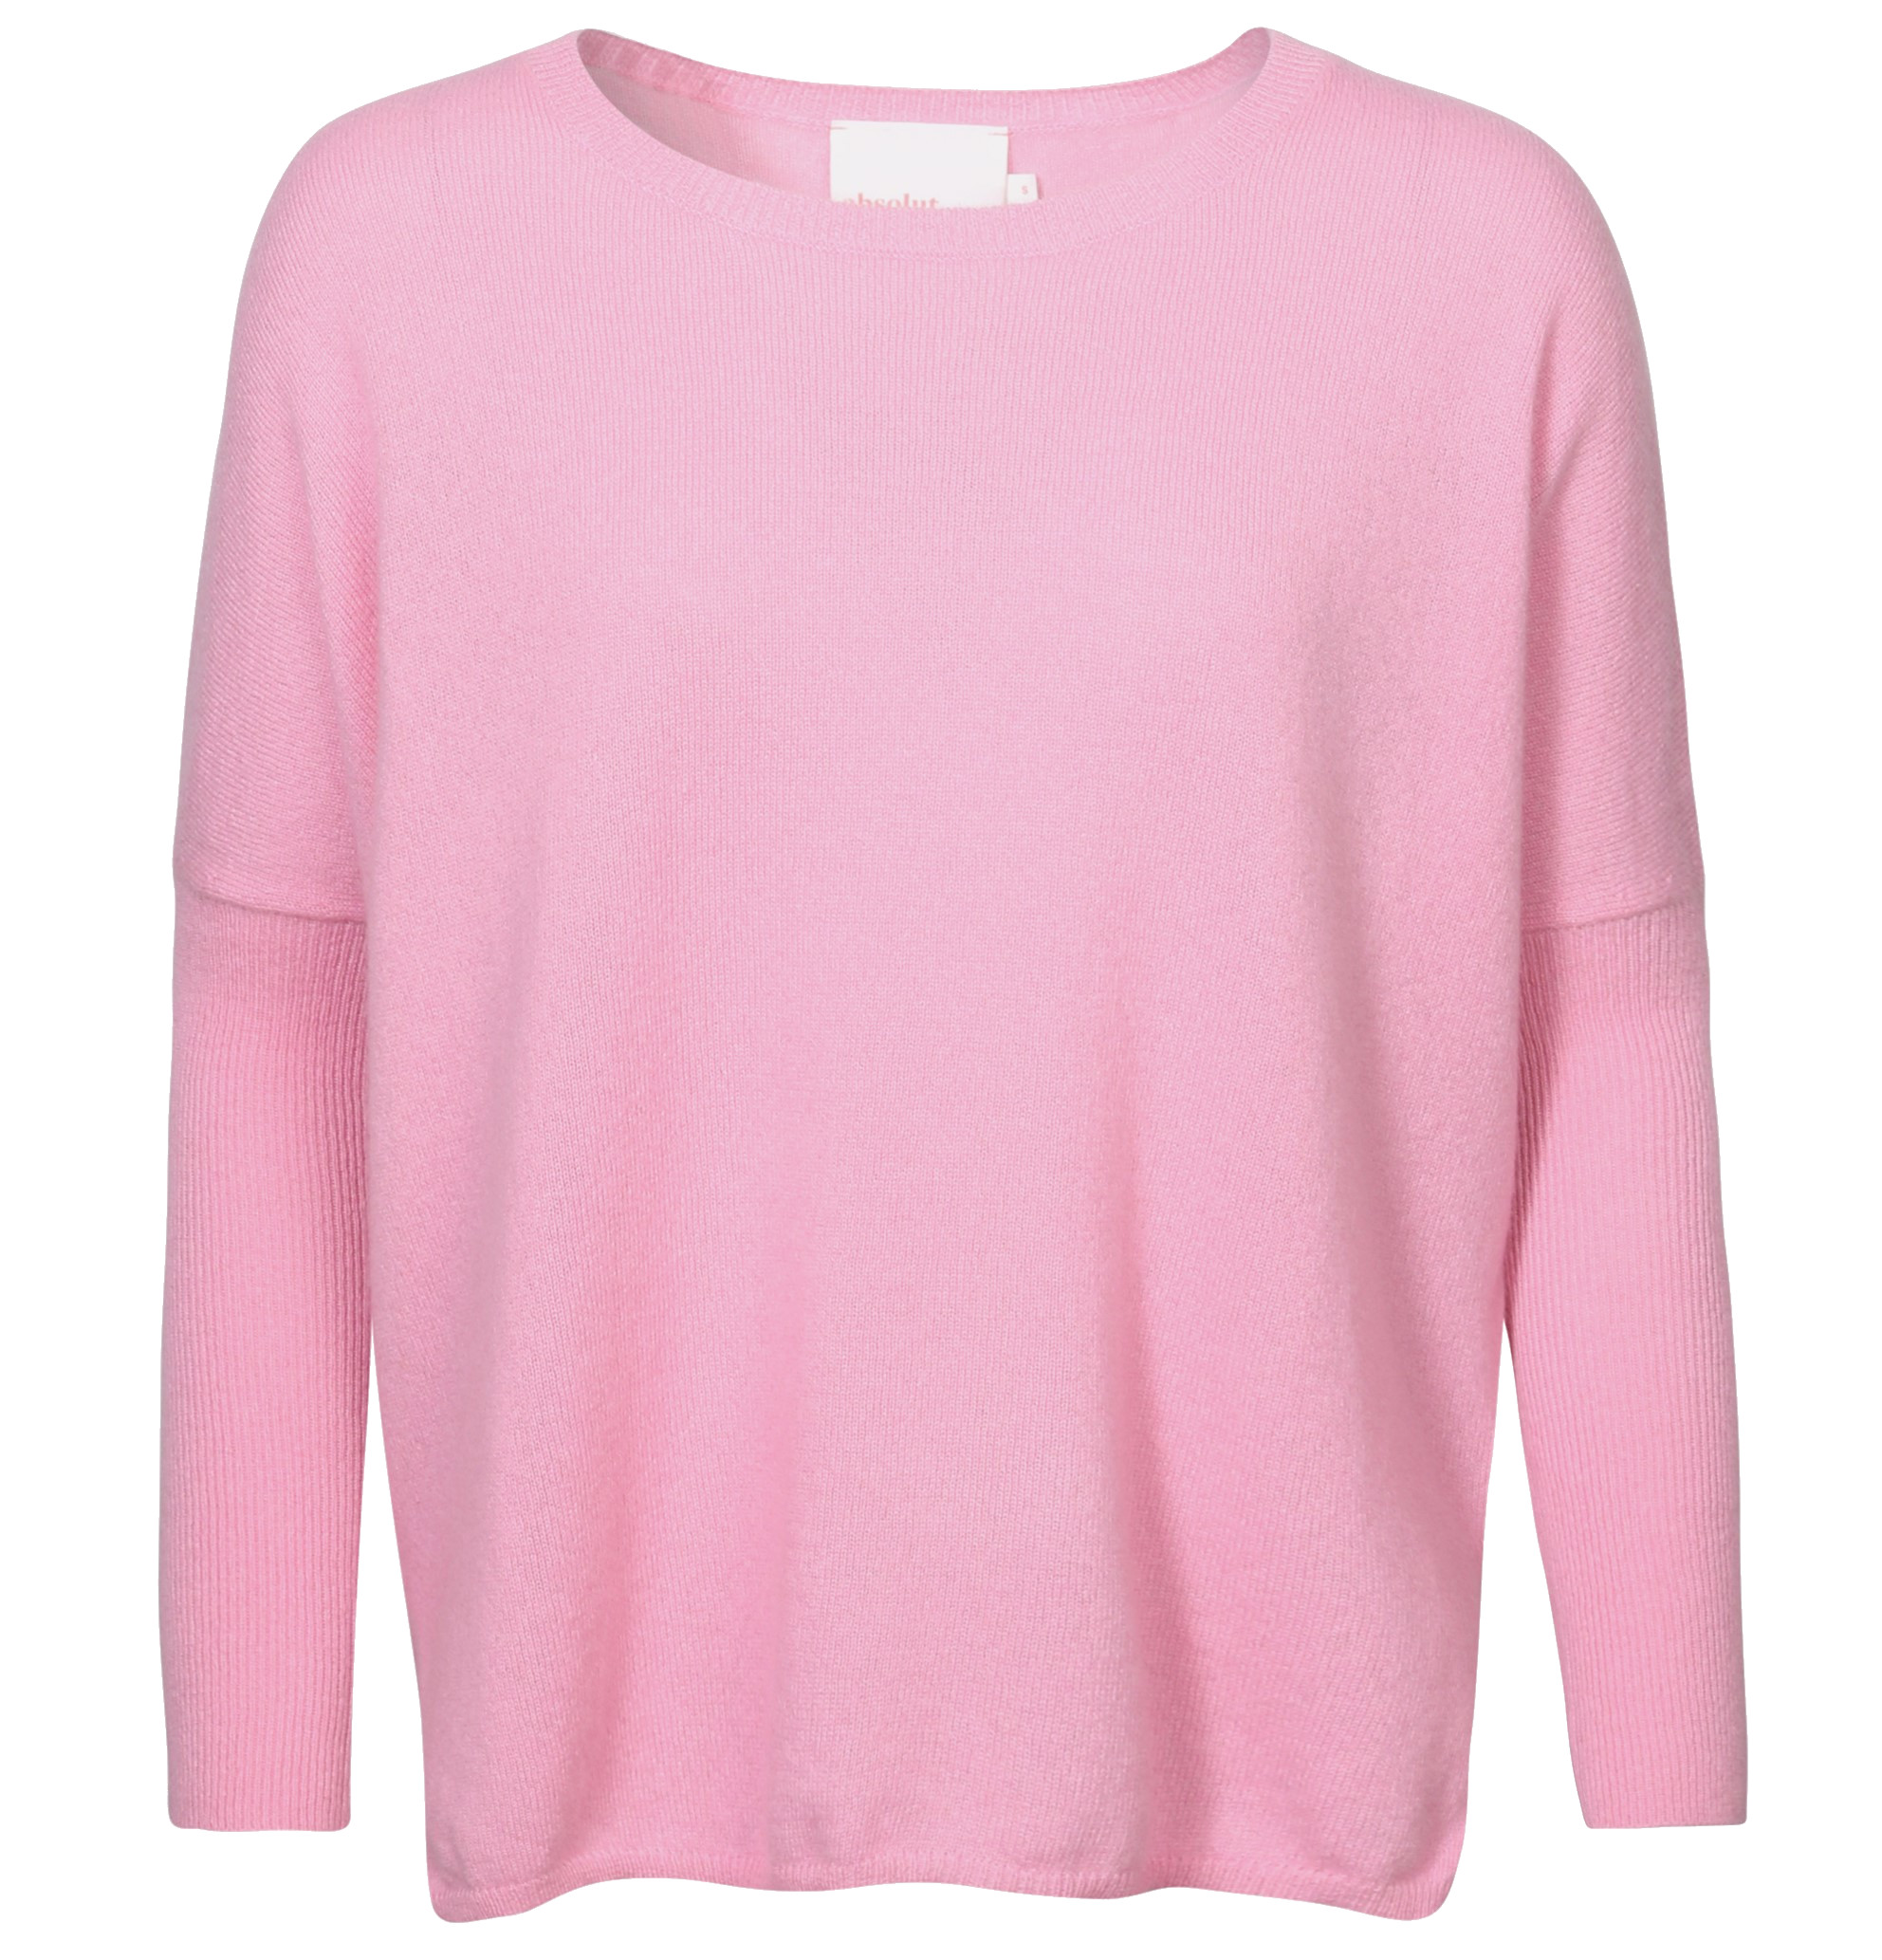 ABSOLUT CASHMERE Poncho Sweater Astrid in Light Pink S